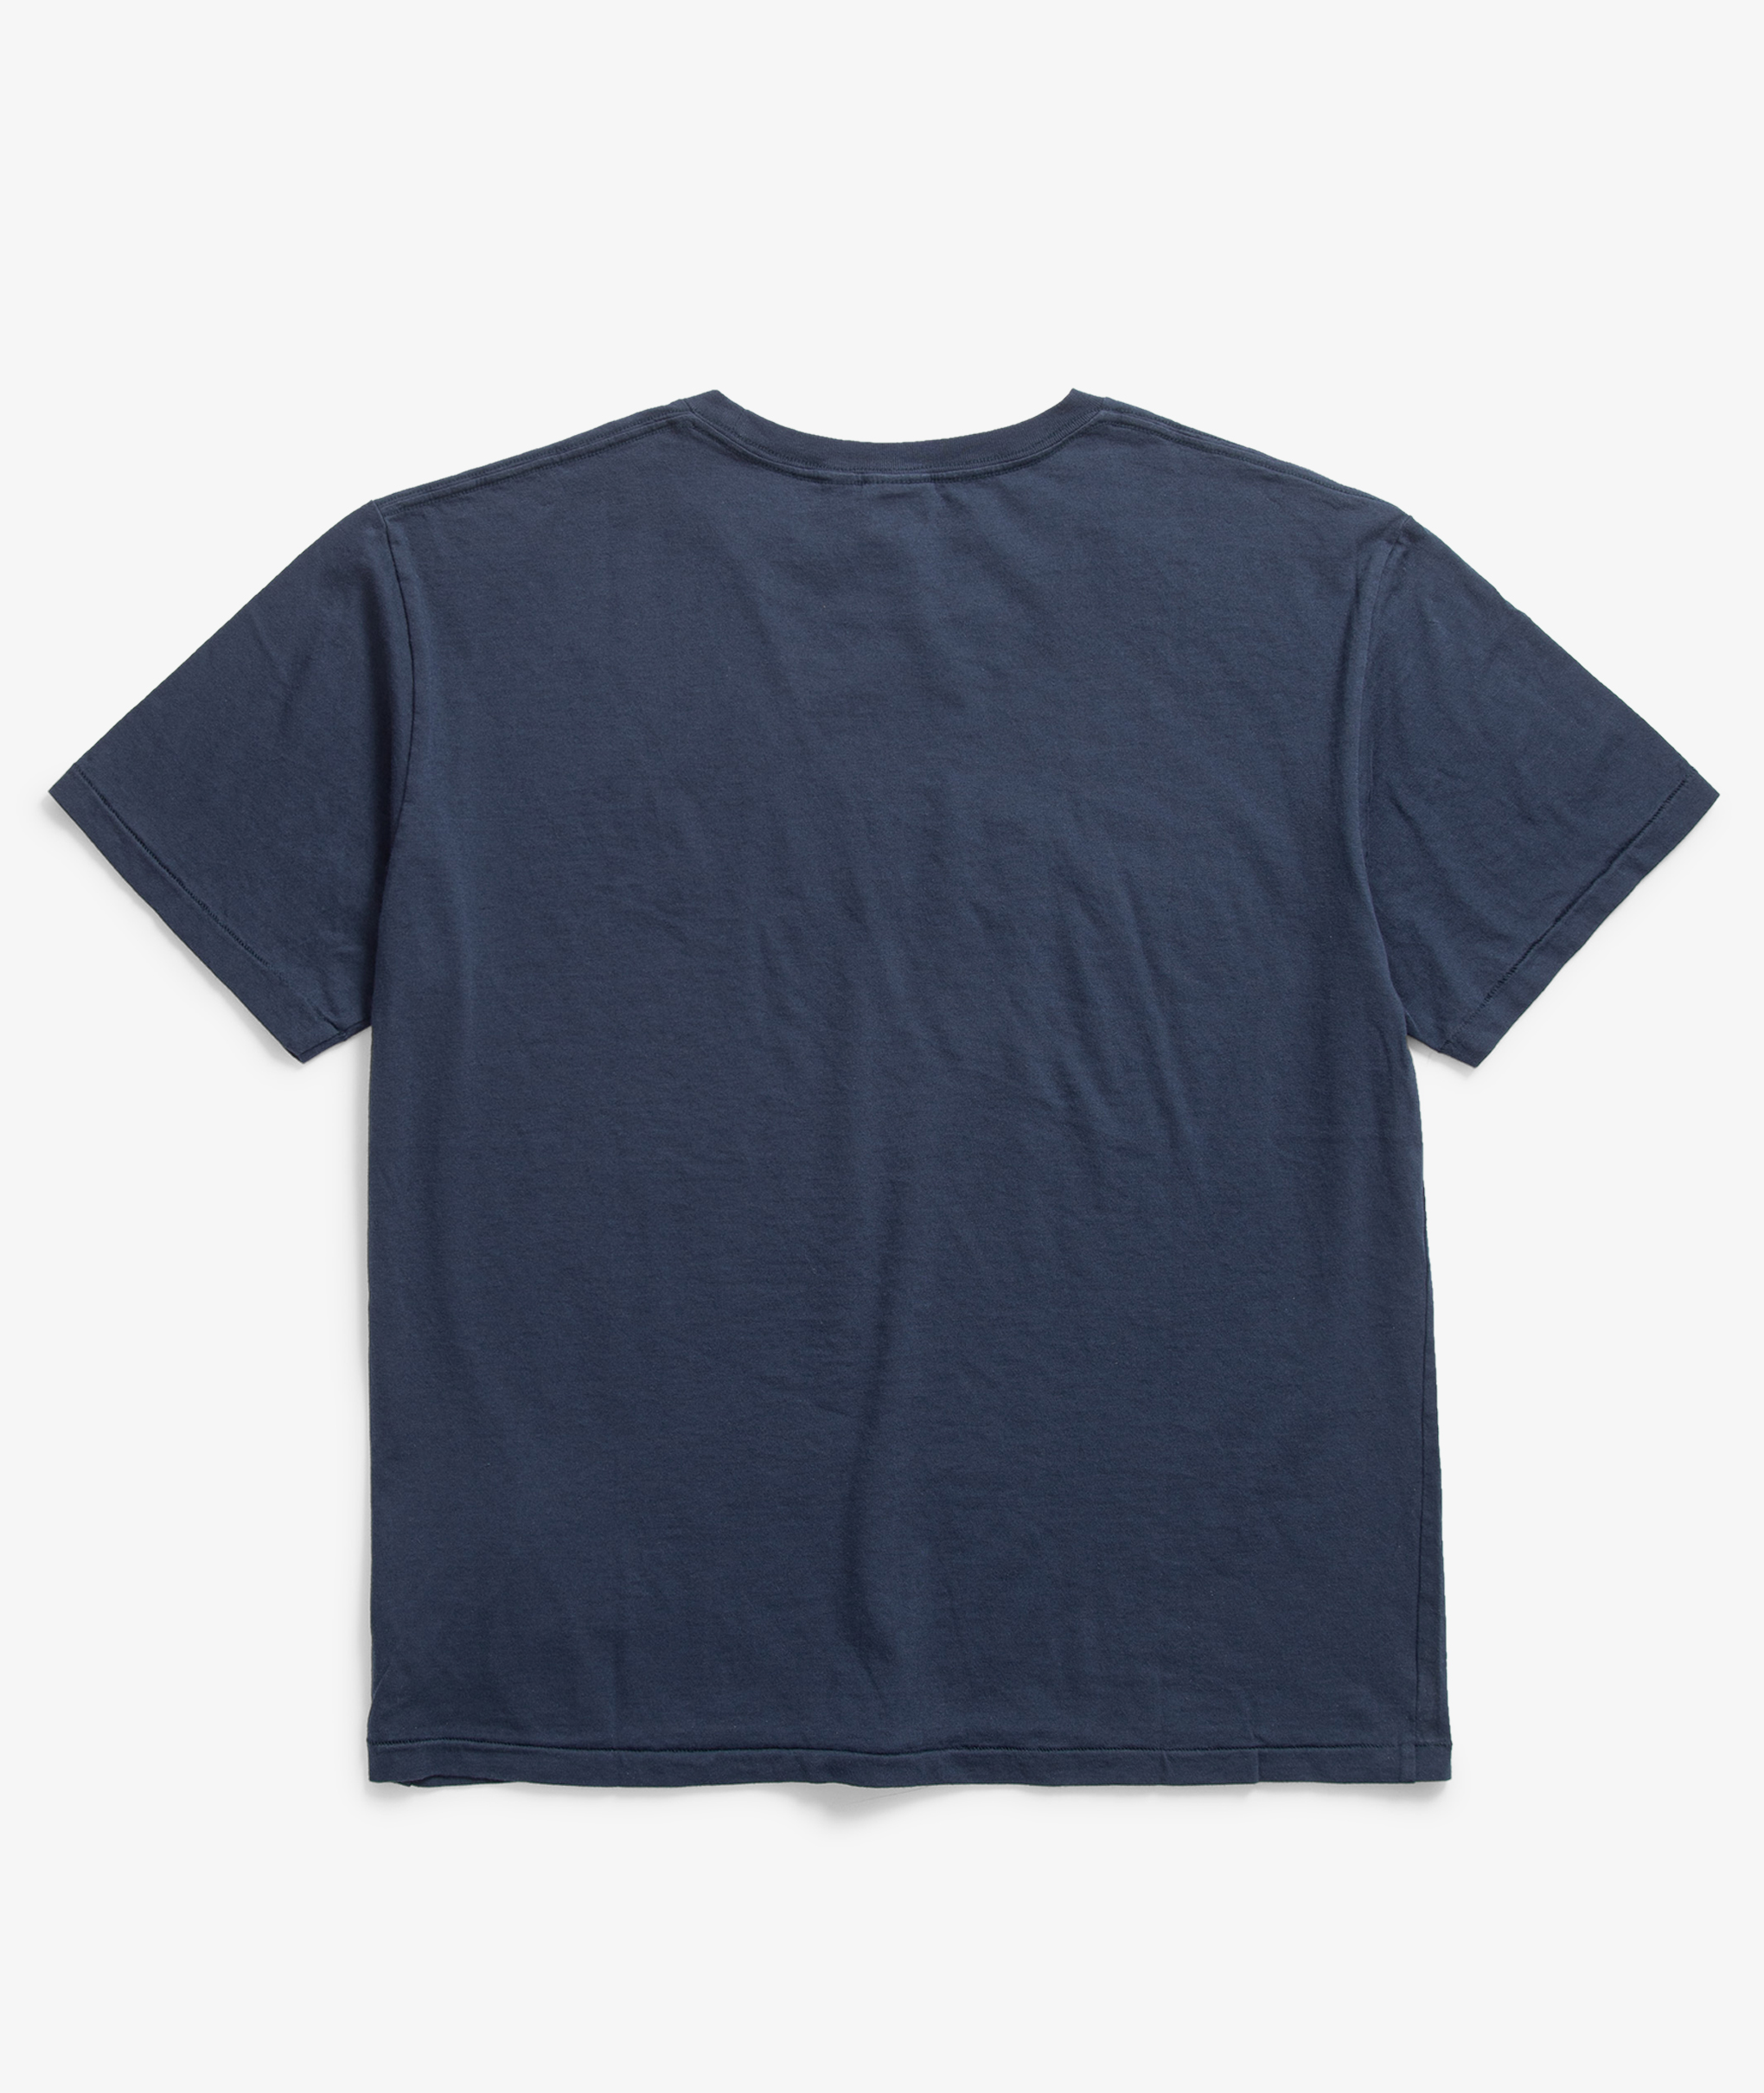 Norse Store | Shipping Worldwide - Orslow ORSL Logo Tee - Navy